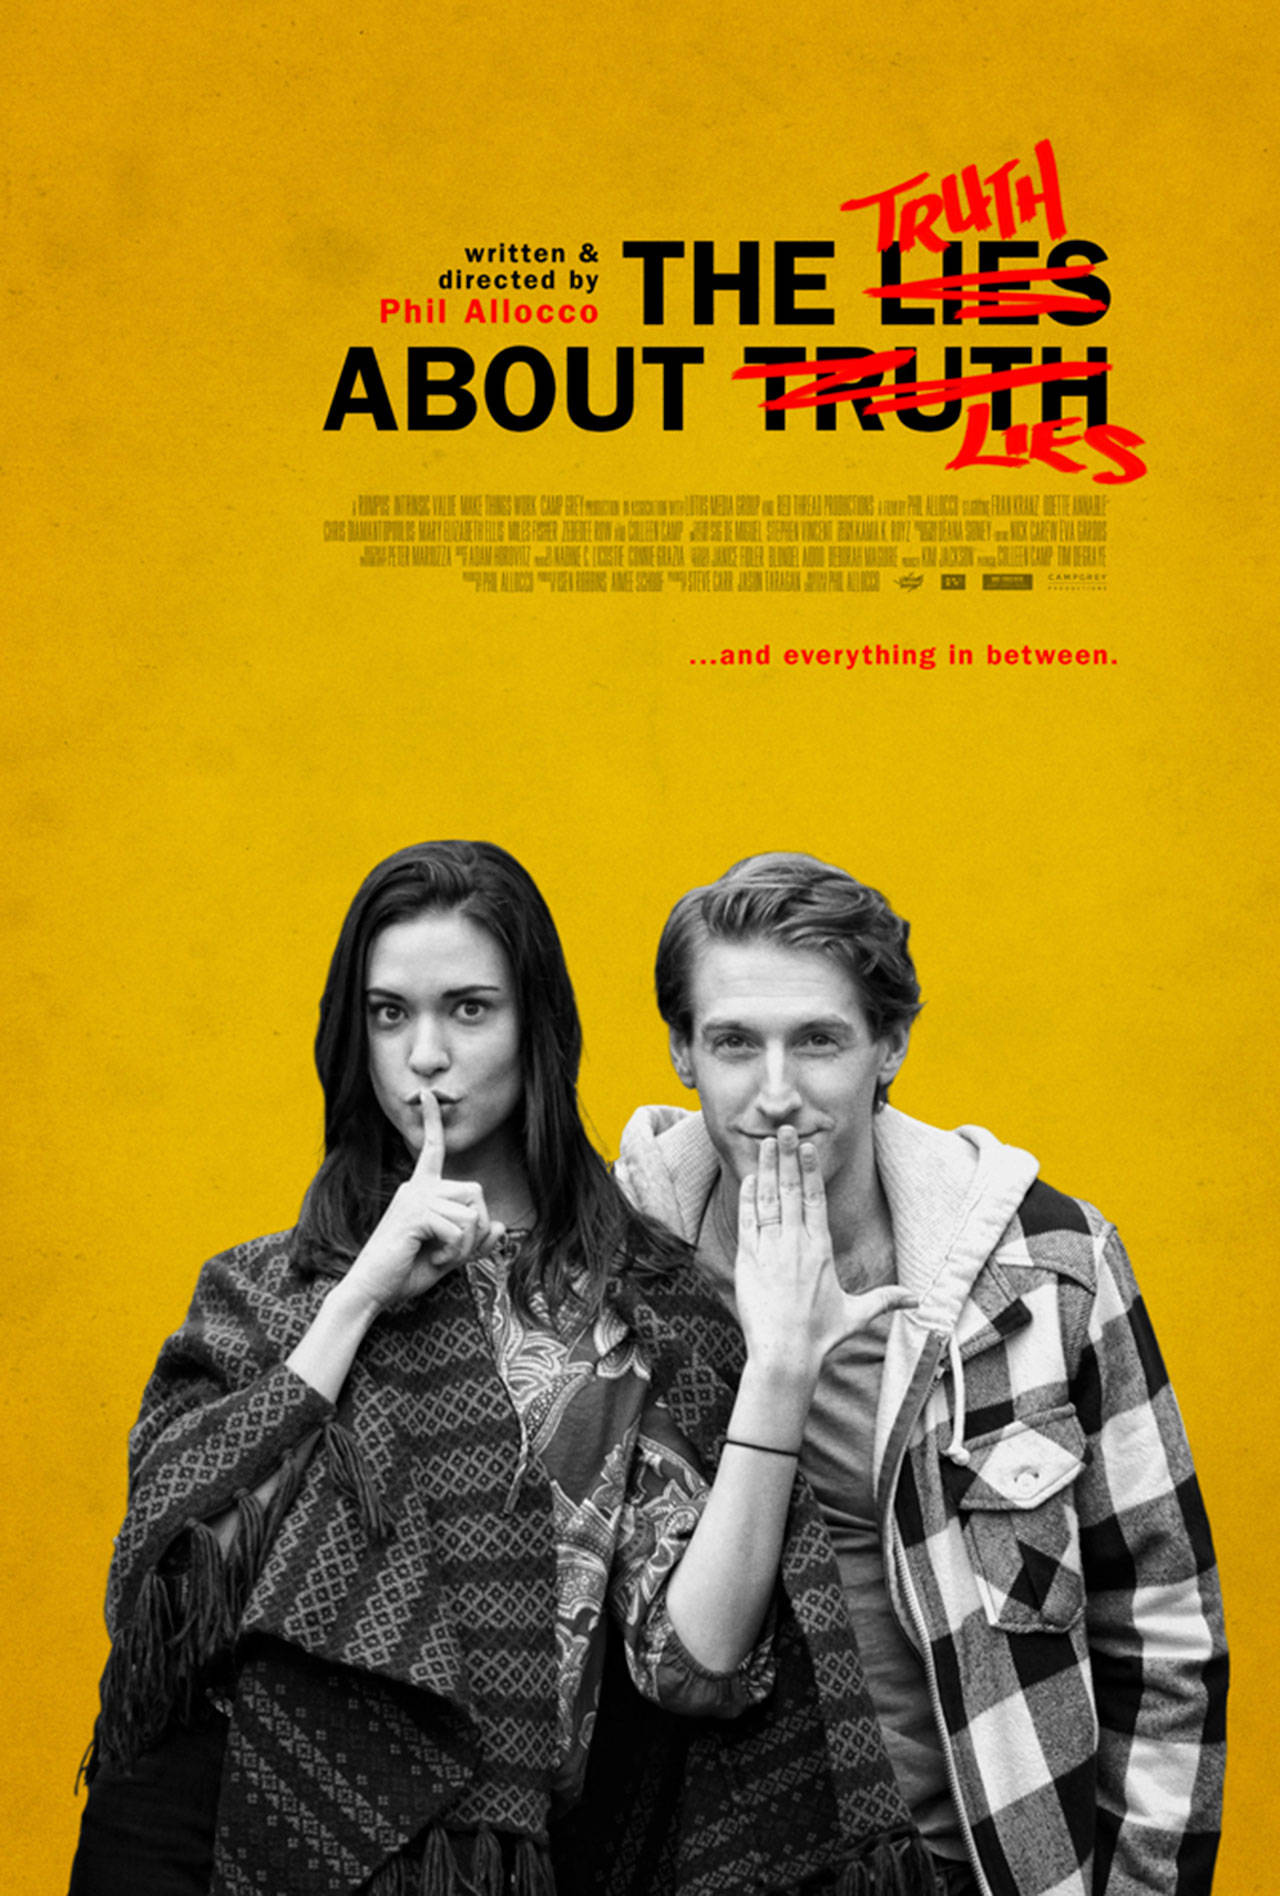 Image courtesy of Blue Fox Entertainment | Rocker turned award-winning filmmaker Phil Allocco’s debut feature “The Truth About Lies” is coming to Bainbridge Island at 7 p.m. Wednesday, Nov. 15 for a special screening at the Lynwood Theatre.